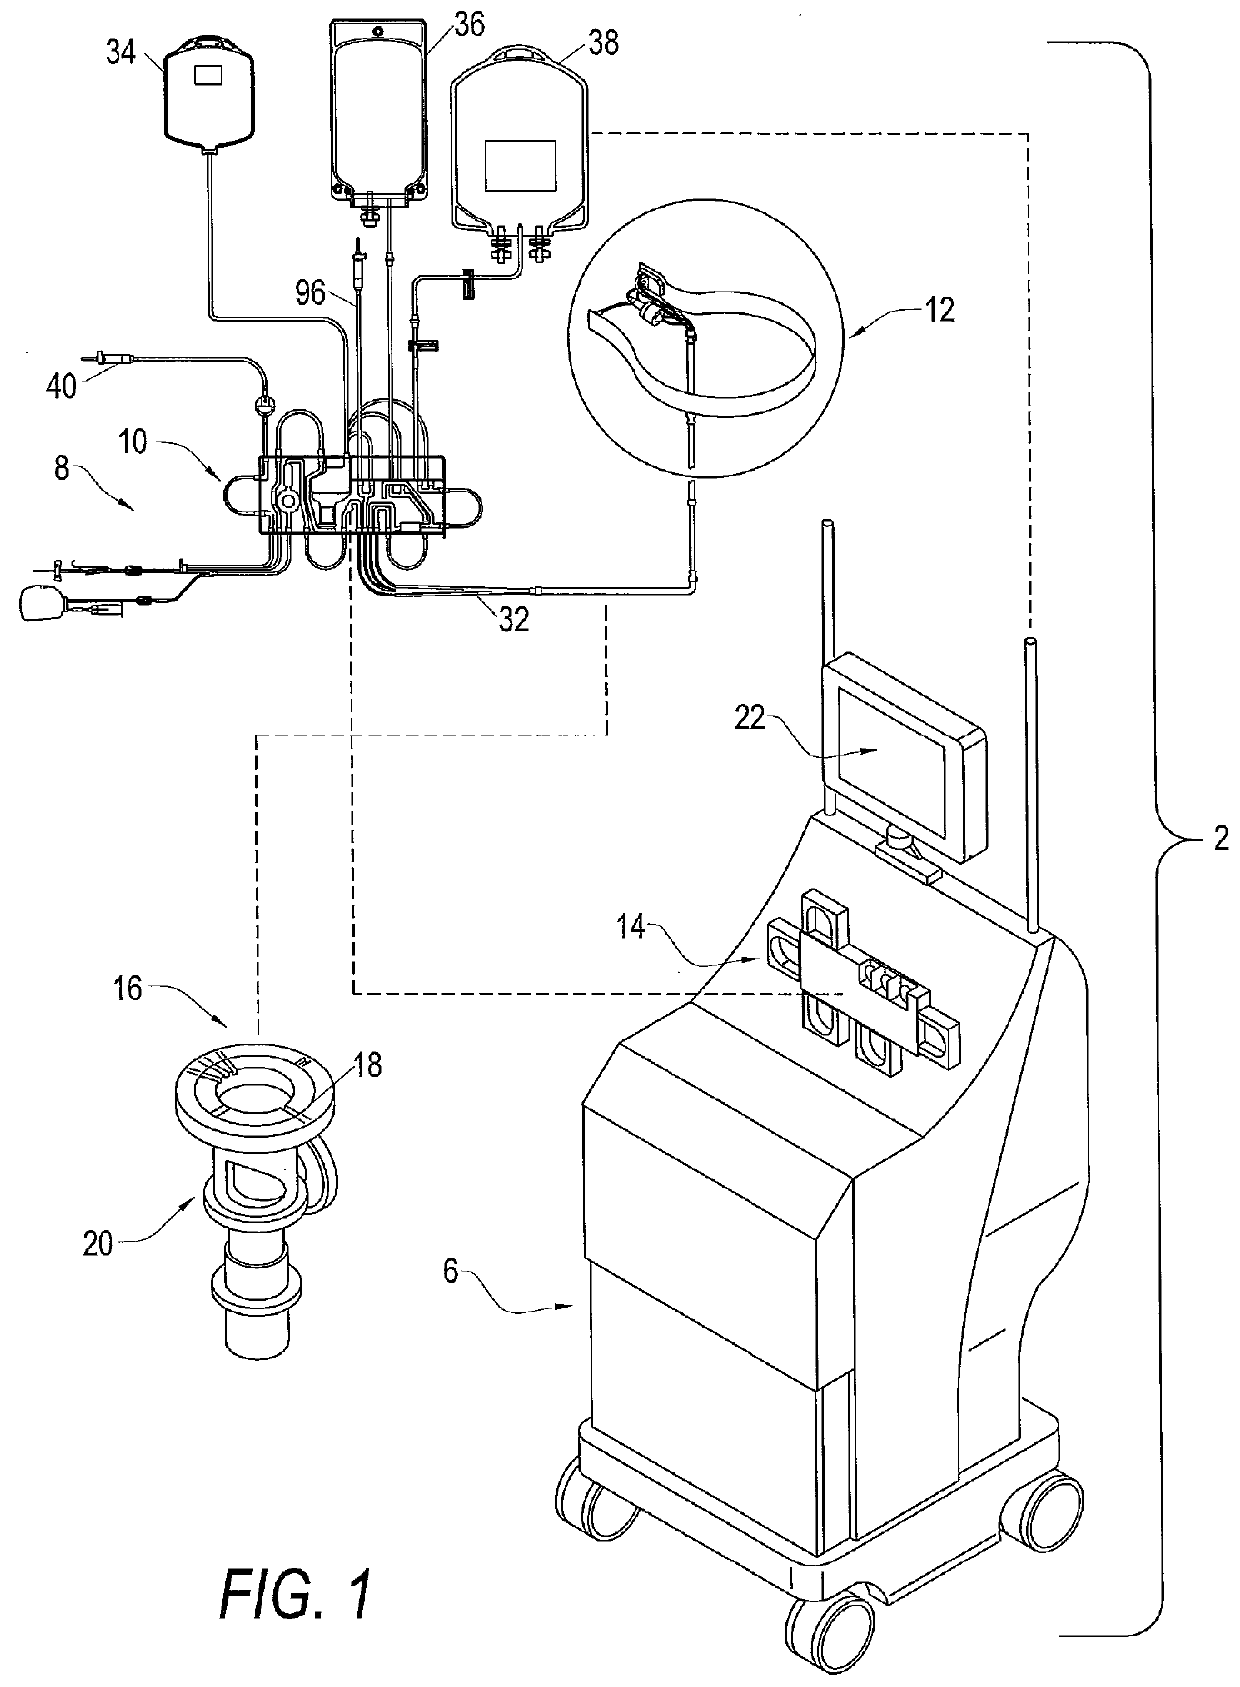 System for blood separation with a separation chamber having an internal gravity valve